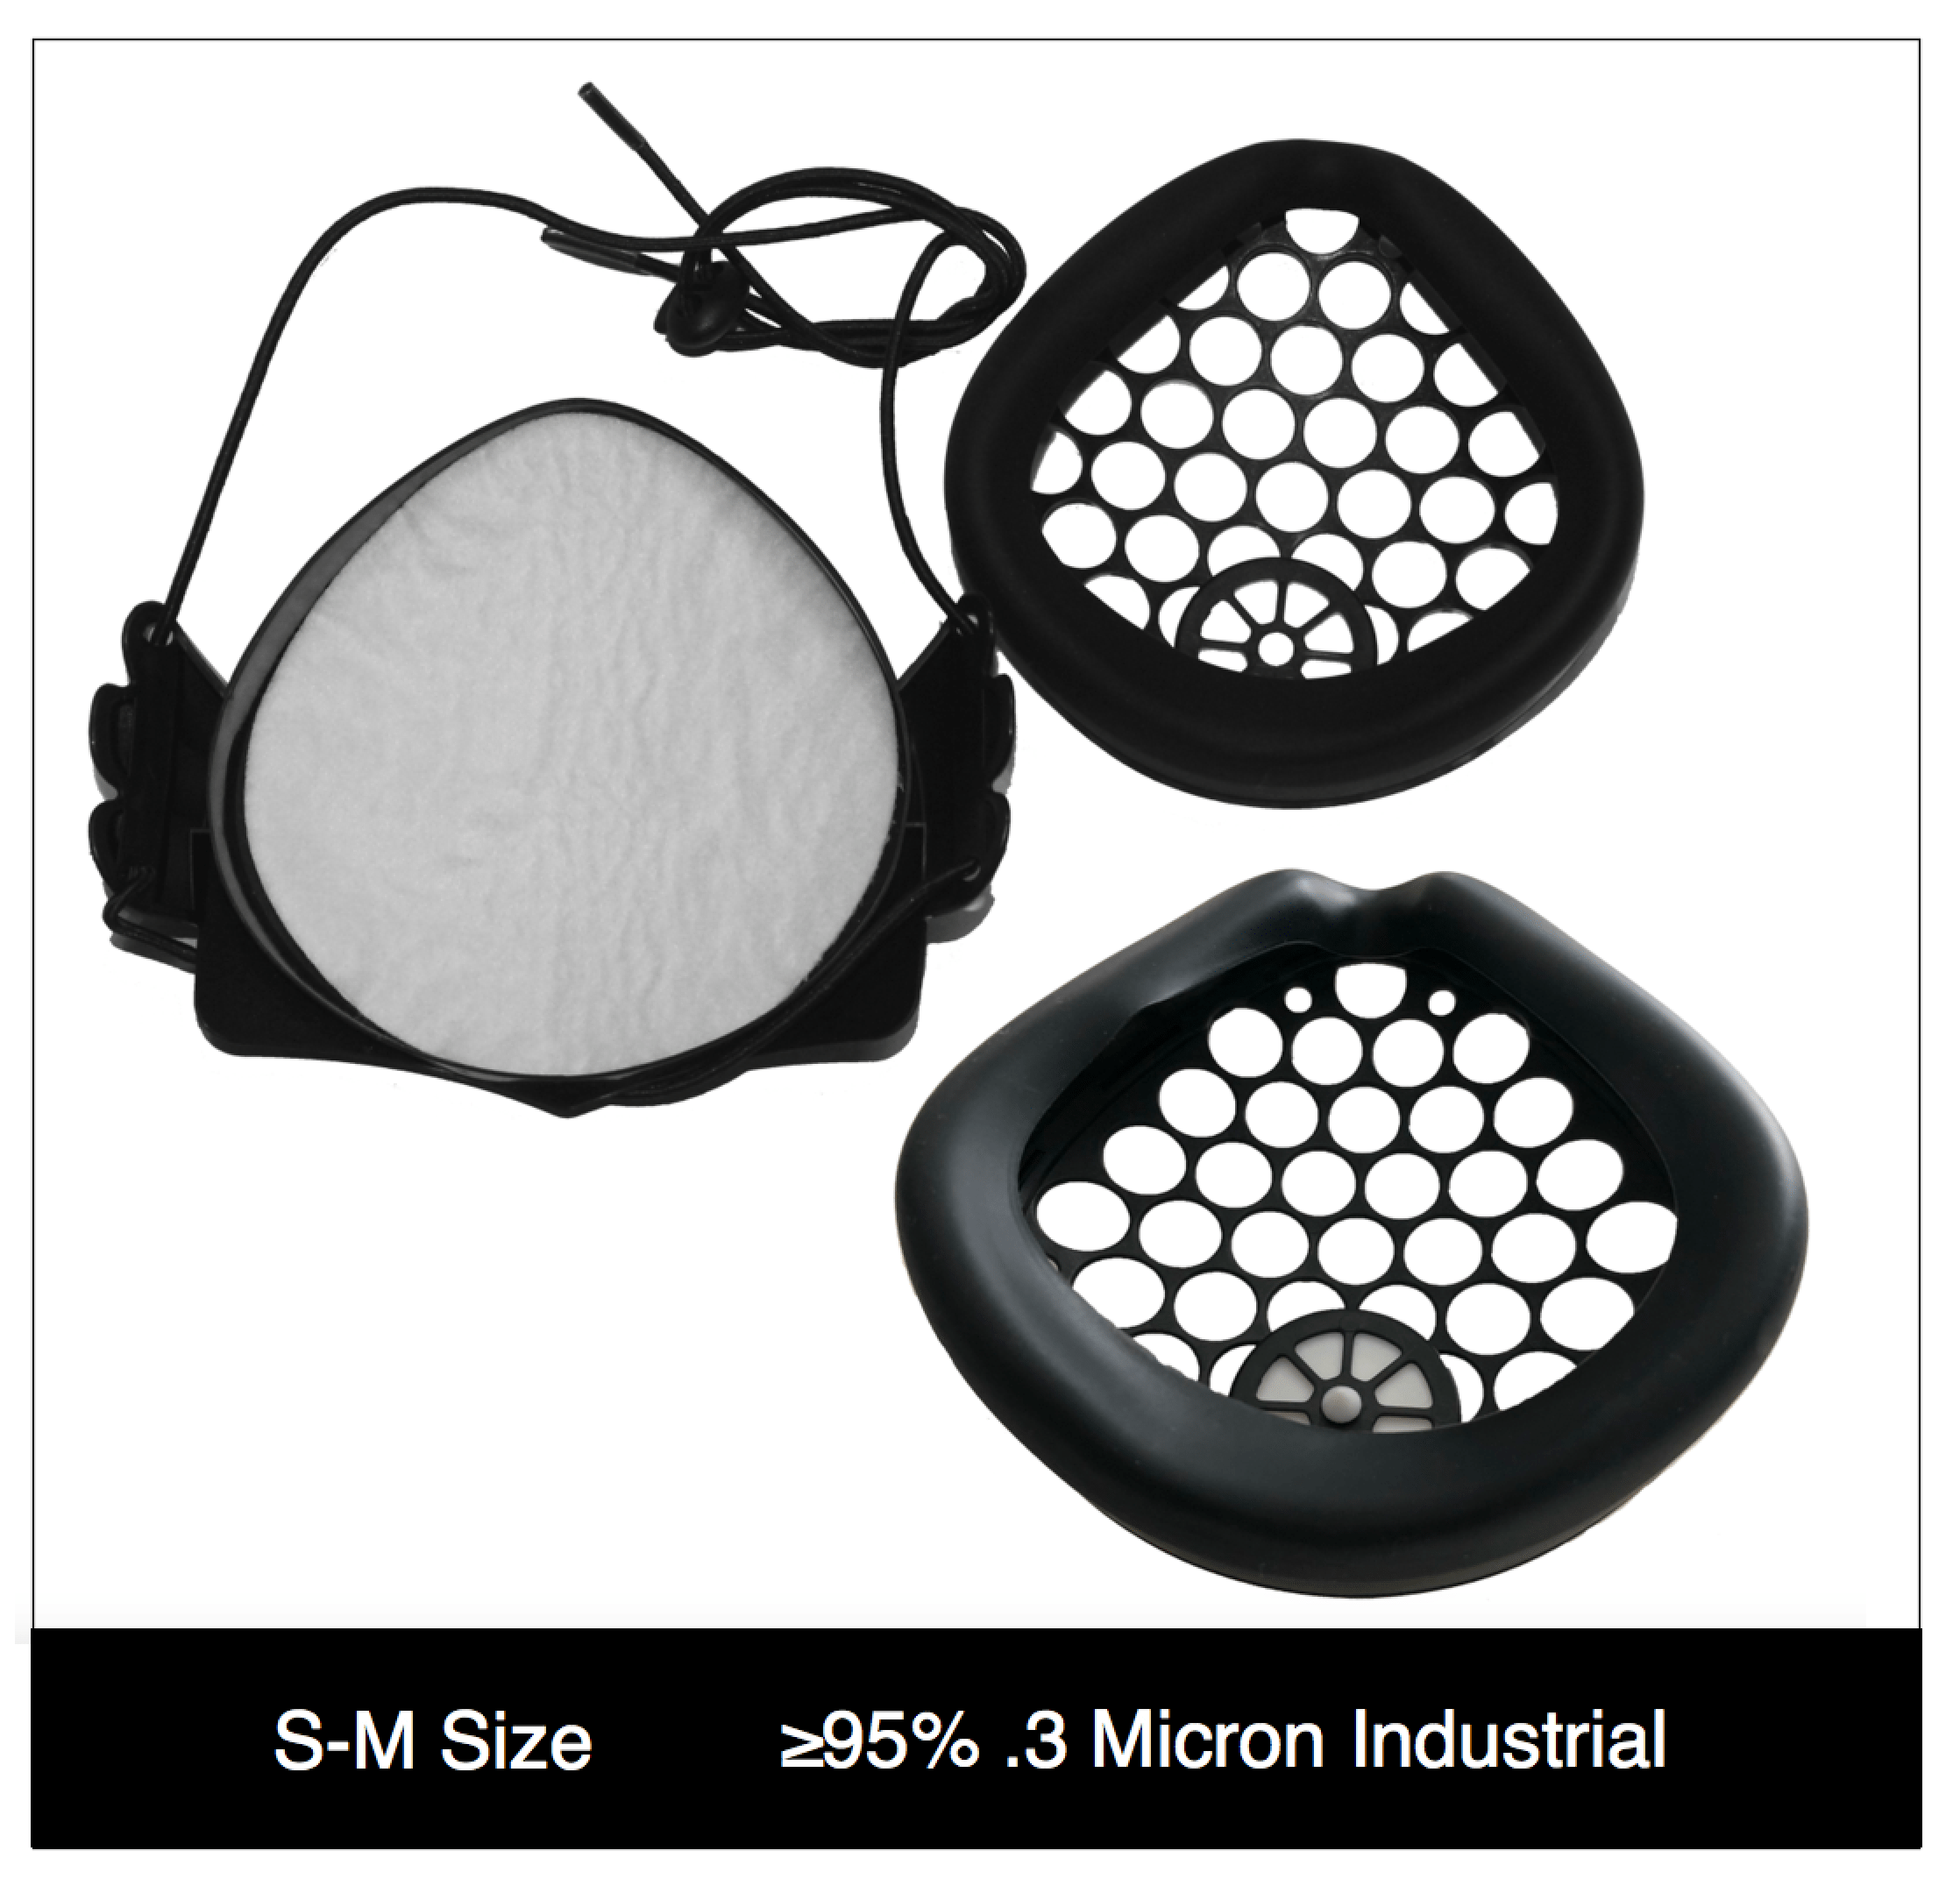 Industrial 95% Filter Set (S-M Size)